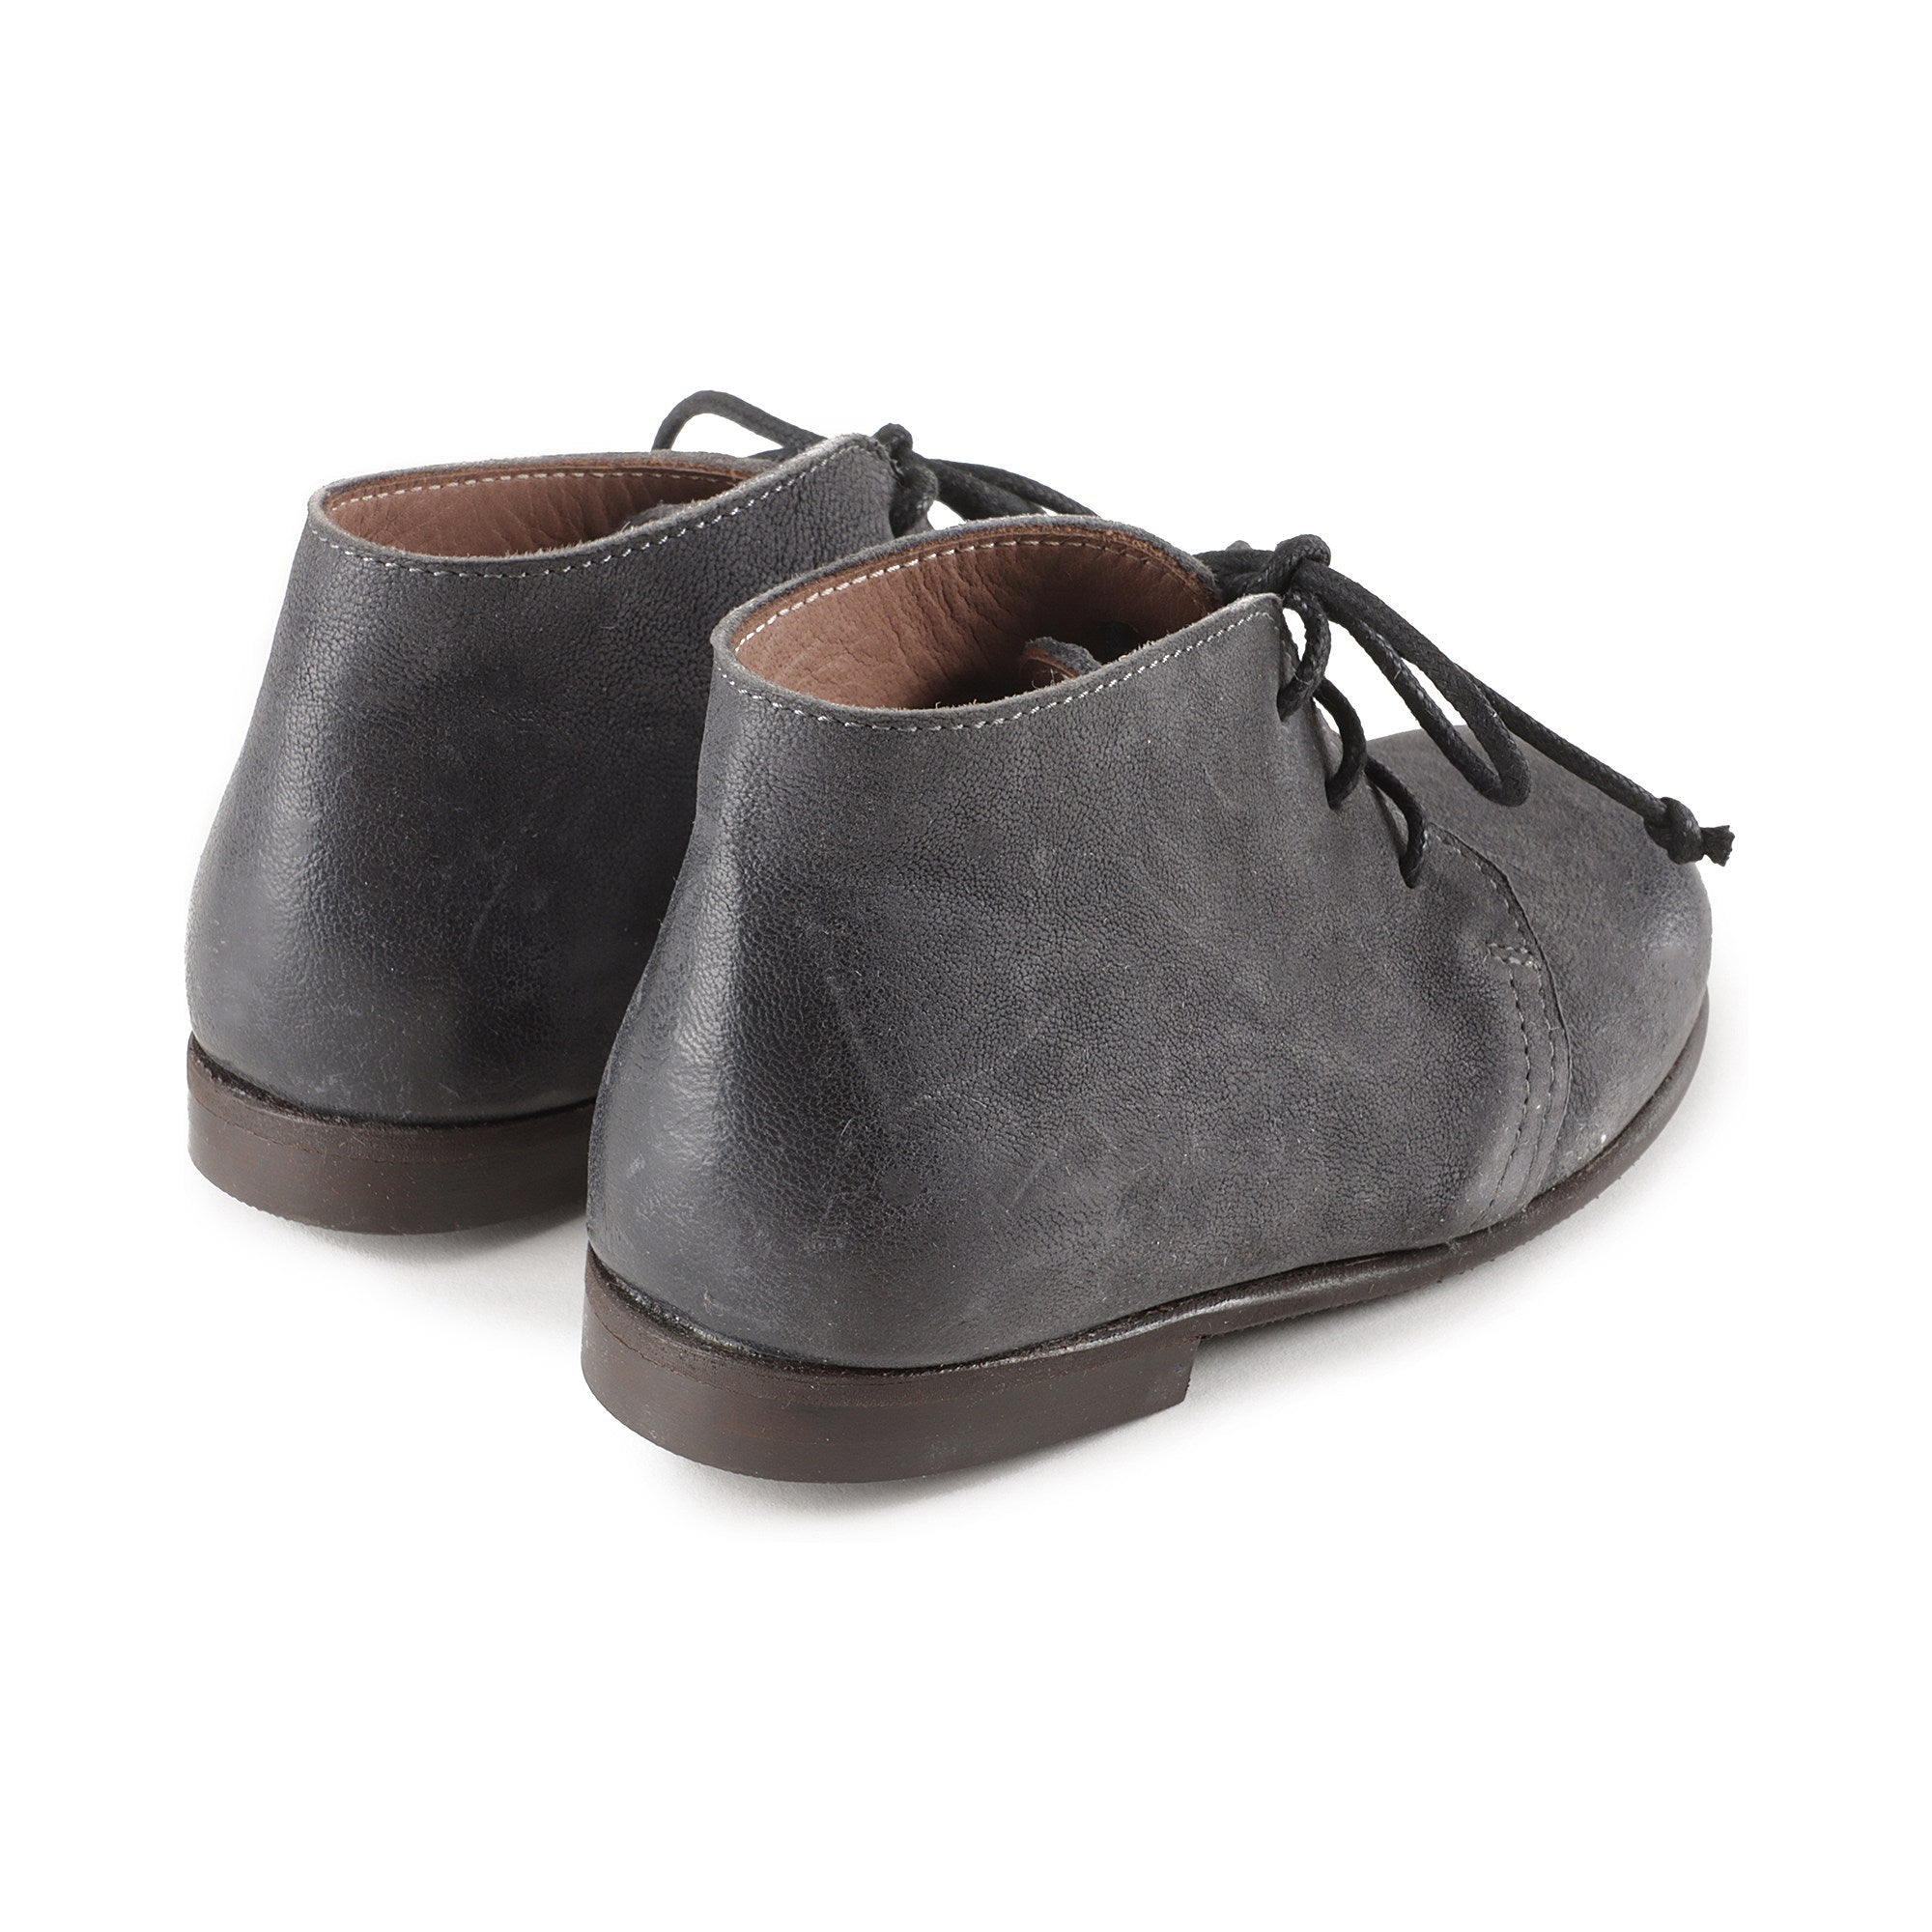 Boys & Girls Grey Leather Shoes